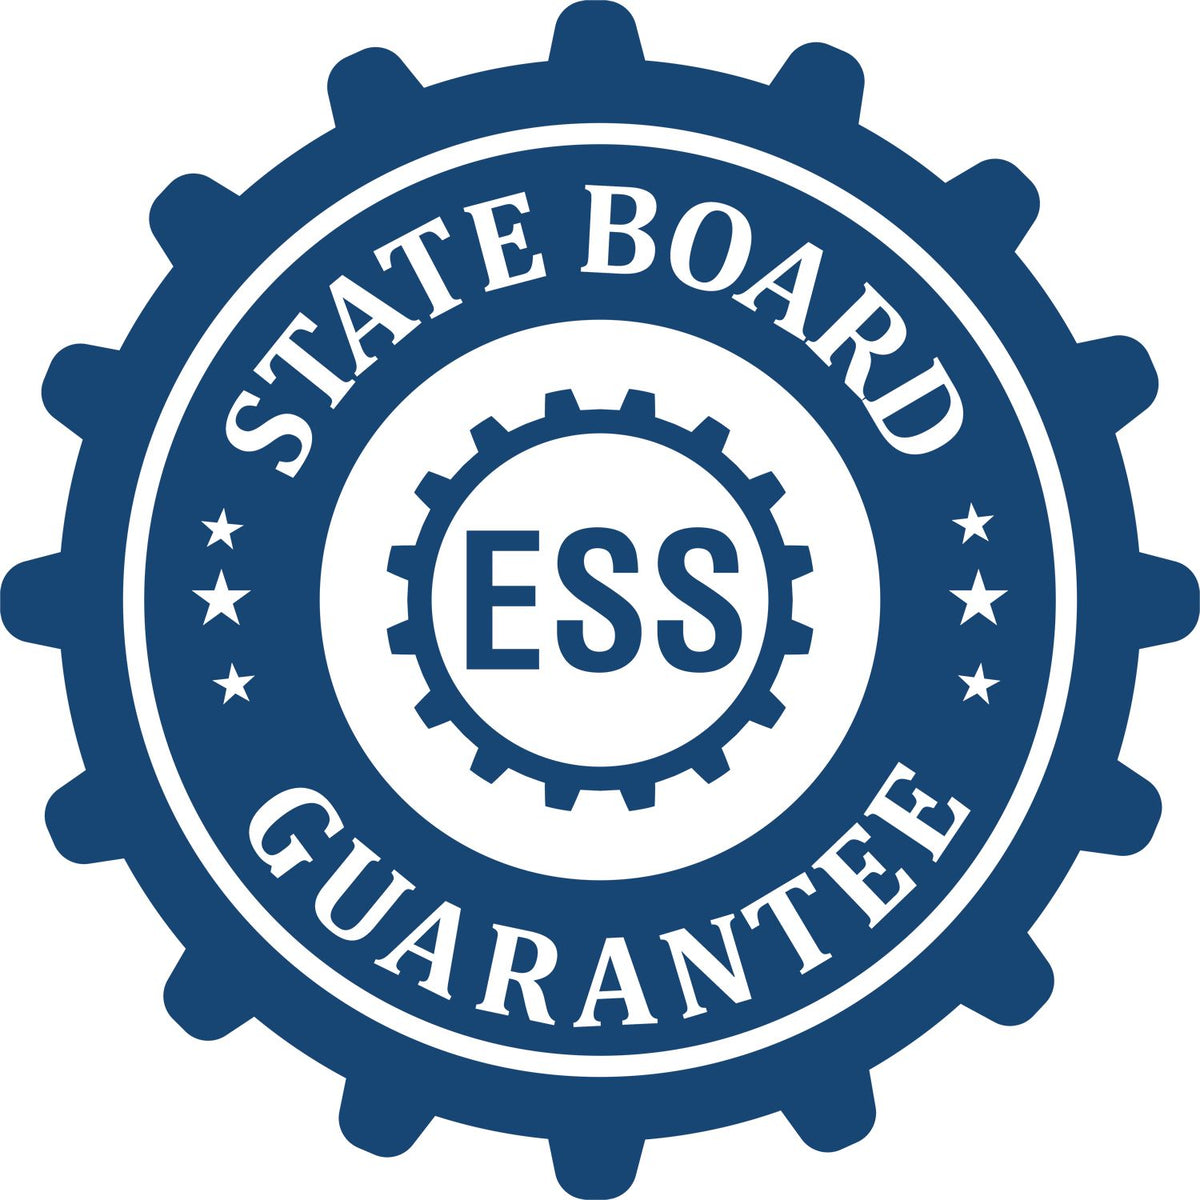 An emblem in a gear shape illustrating a state board guarantee for the New Mexico Professional Geologist Seal Stamp